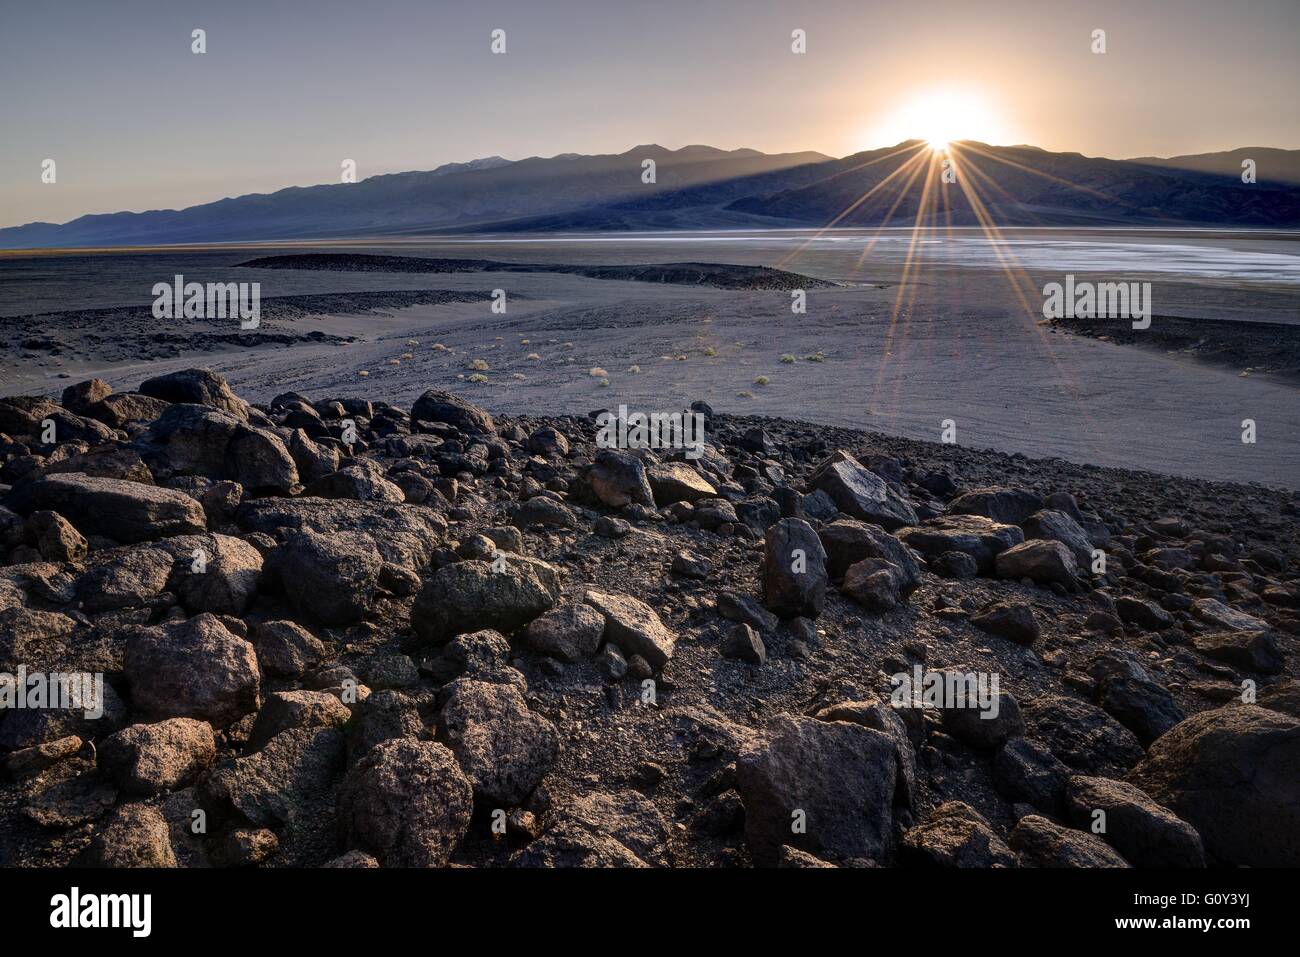 Sunset Over Badwater basin, Death Valley National Park, California, United States Stock Photo